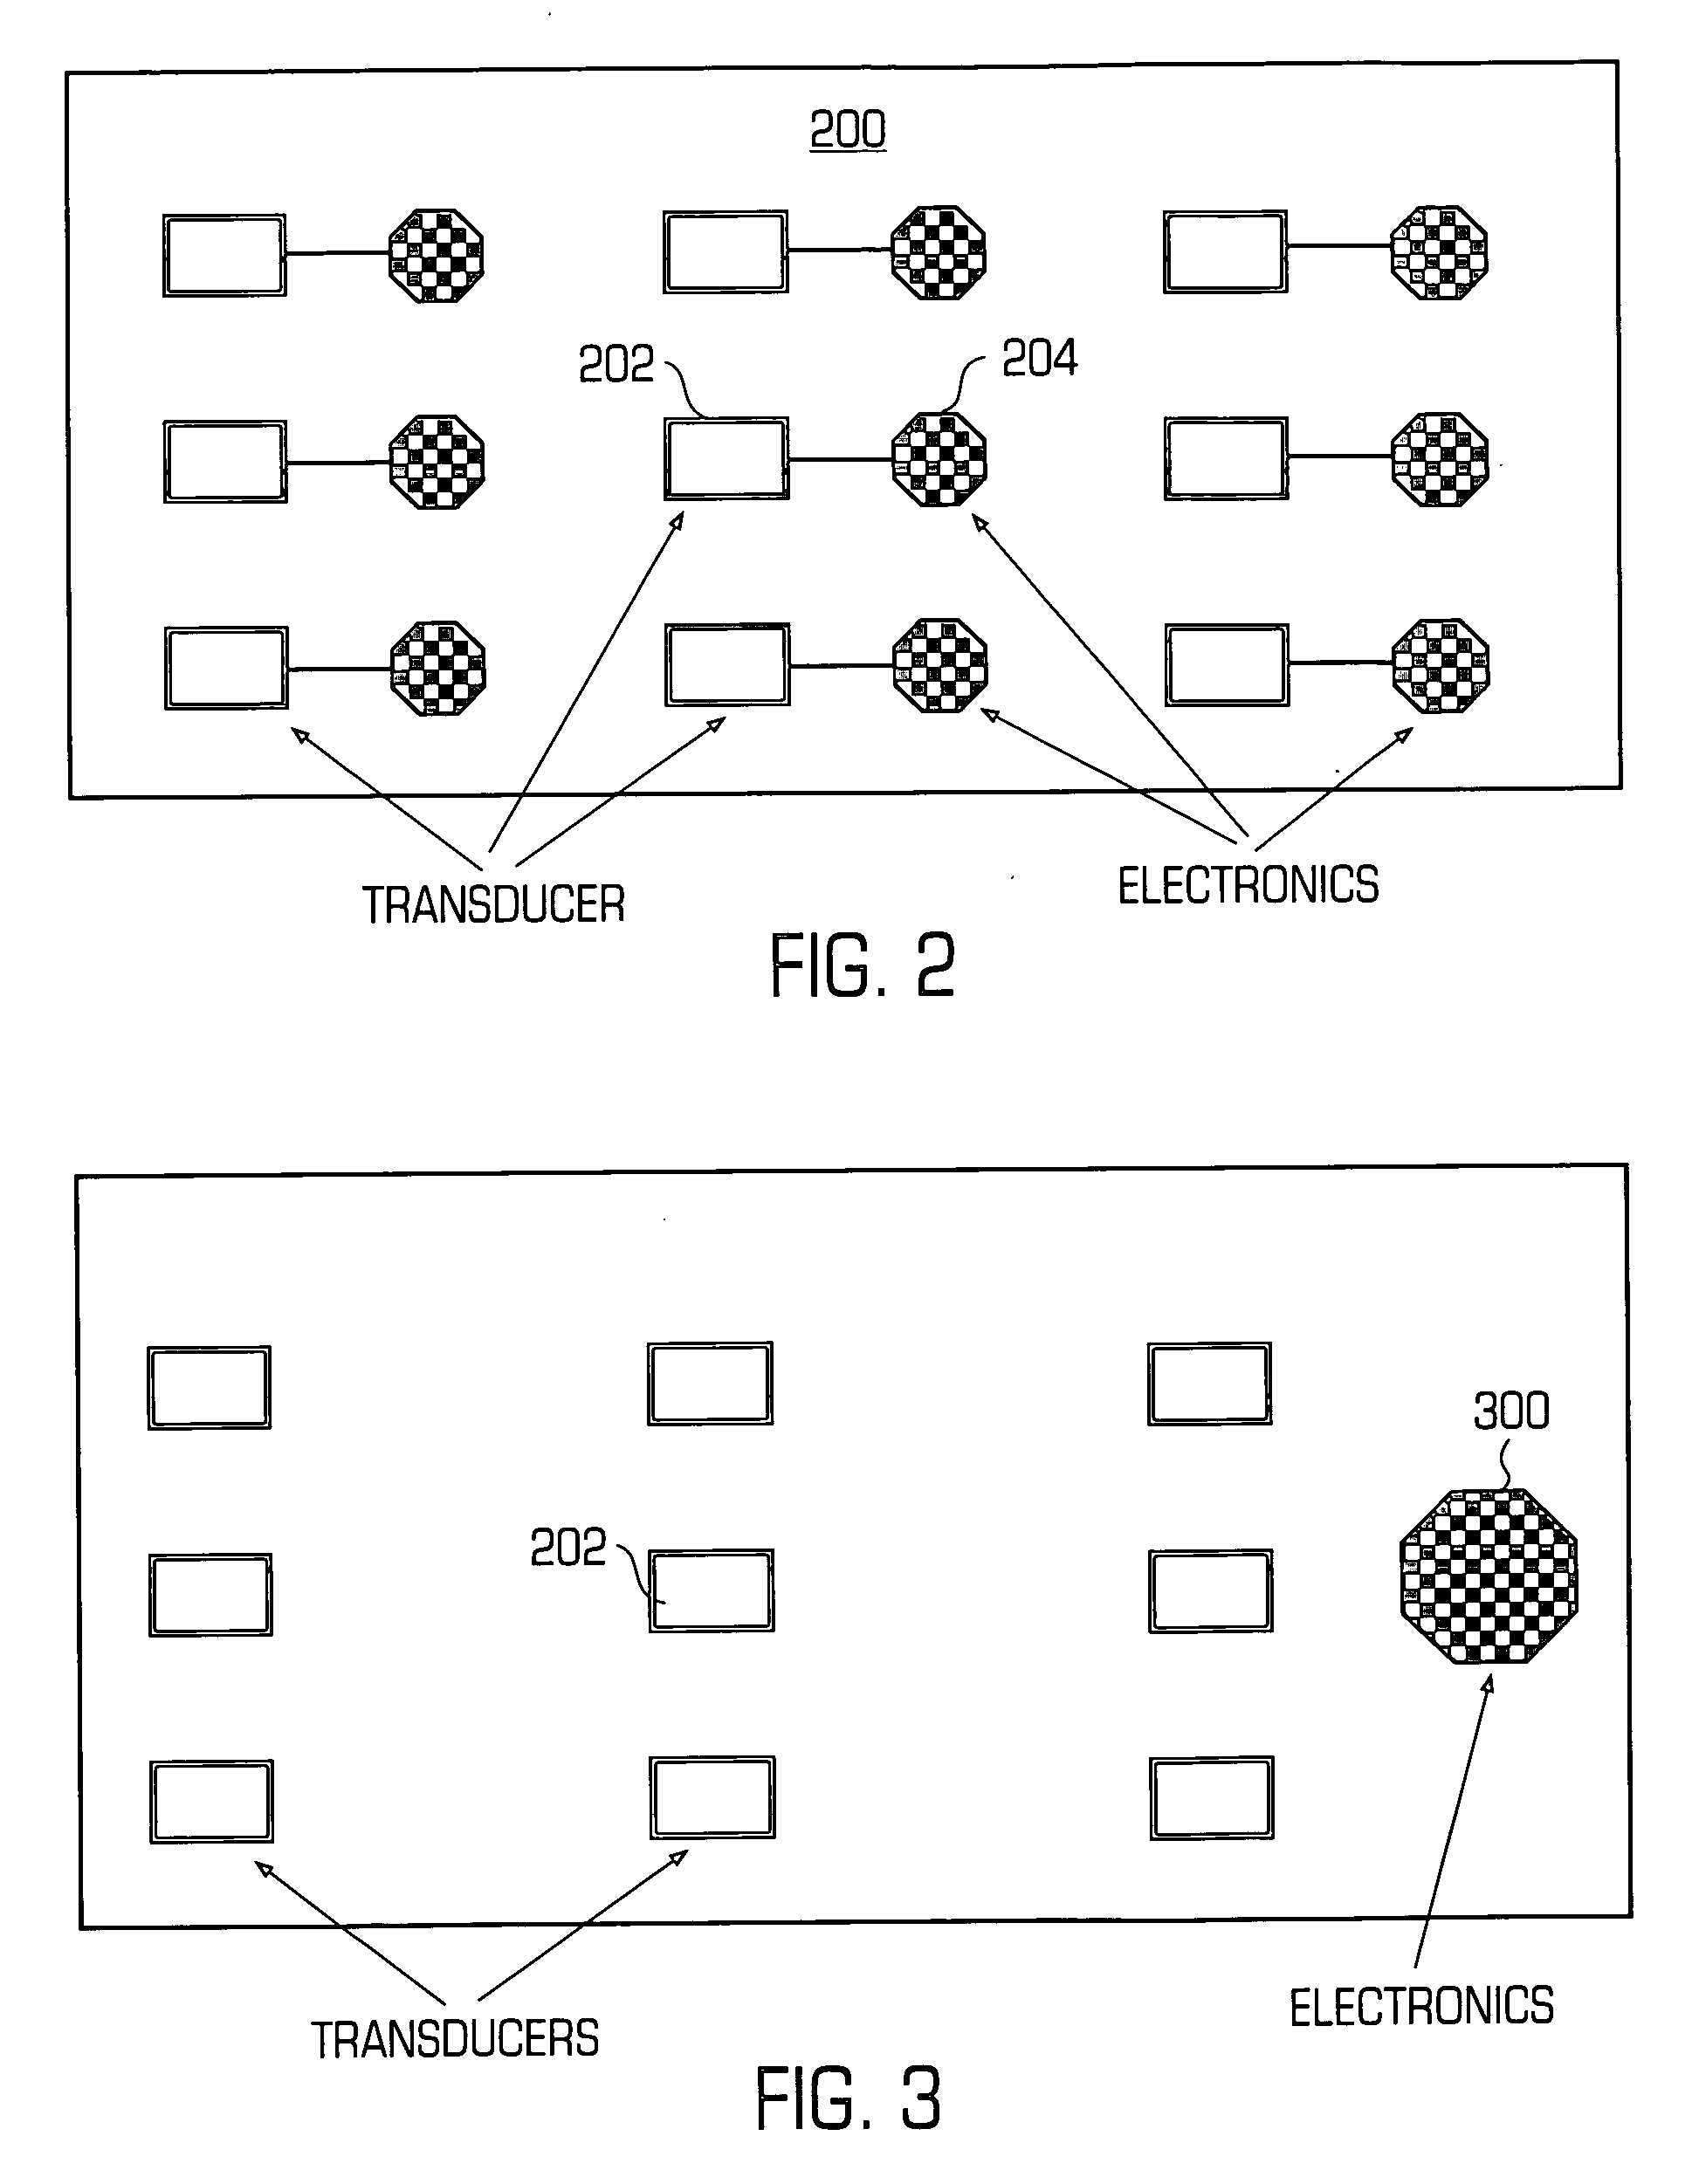 Structural health monitoring layer having distributed electronics